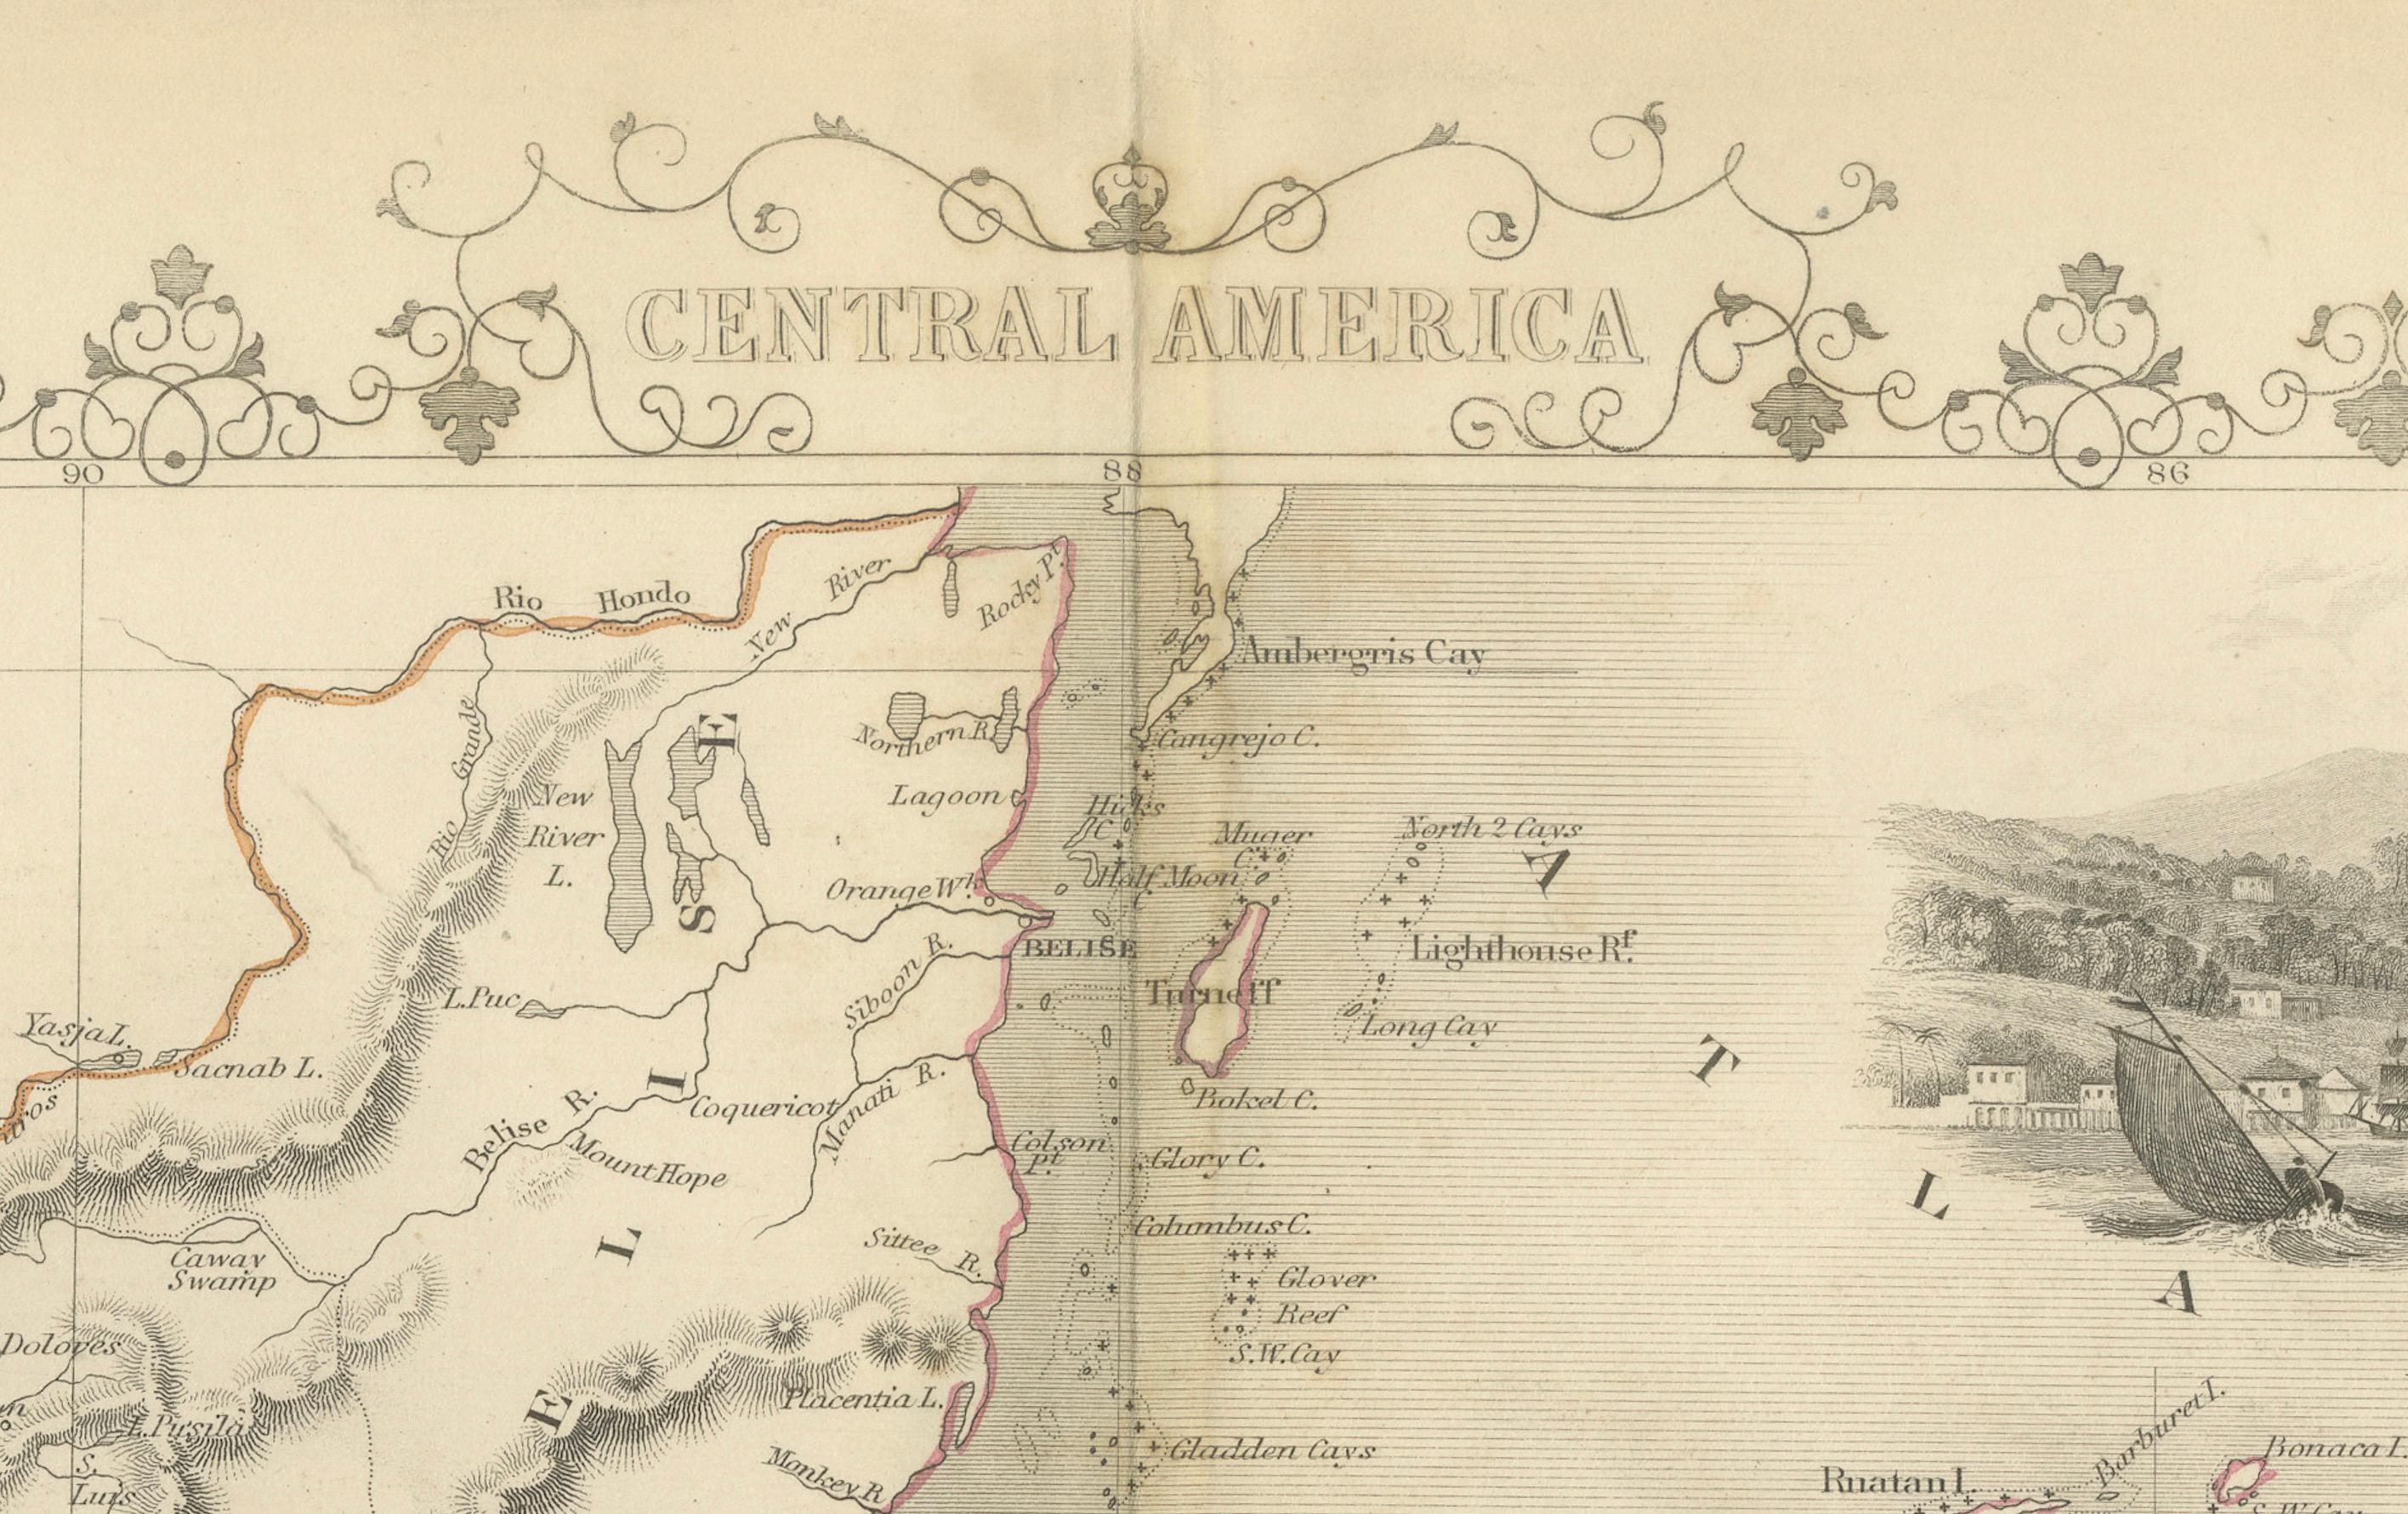 This map of Central America, part of John Tallis & Company's series from 